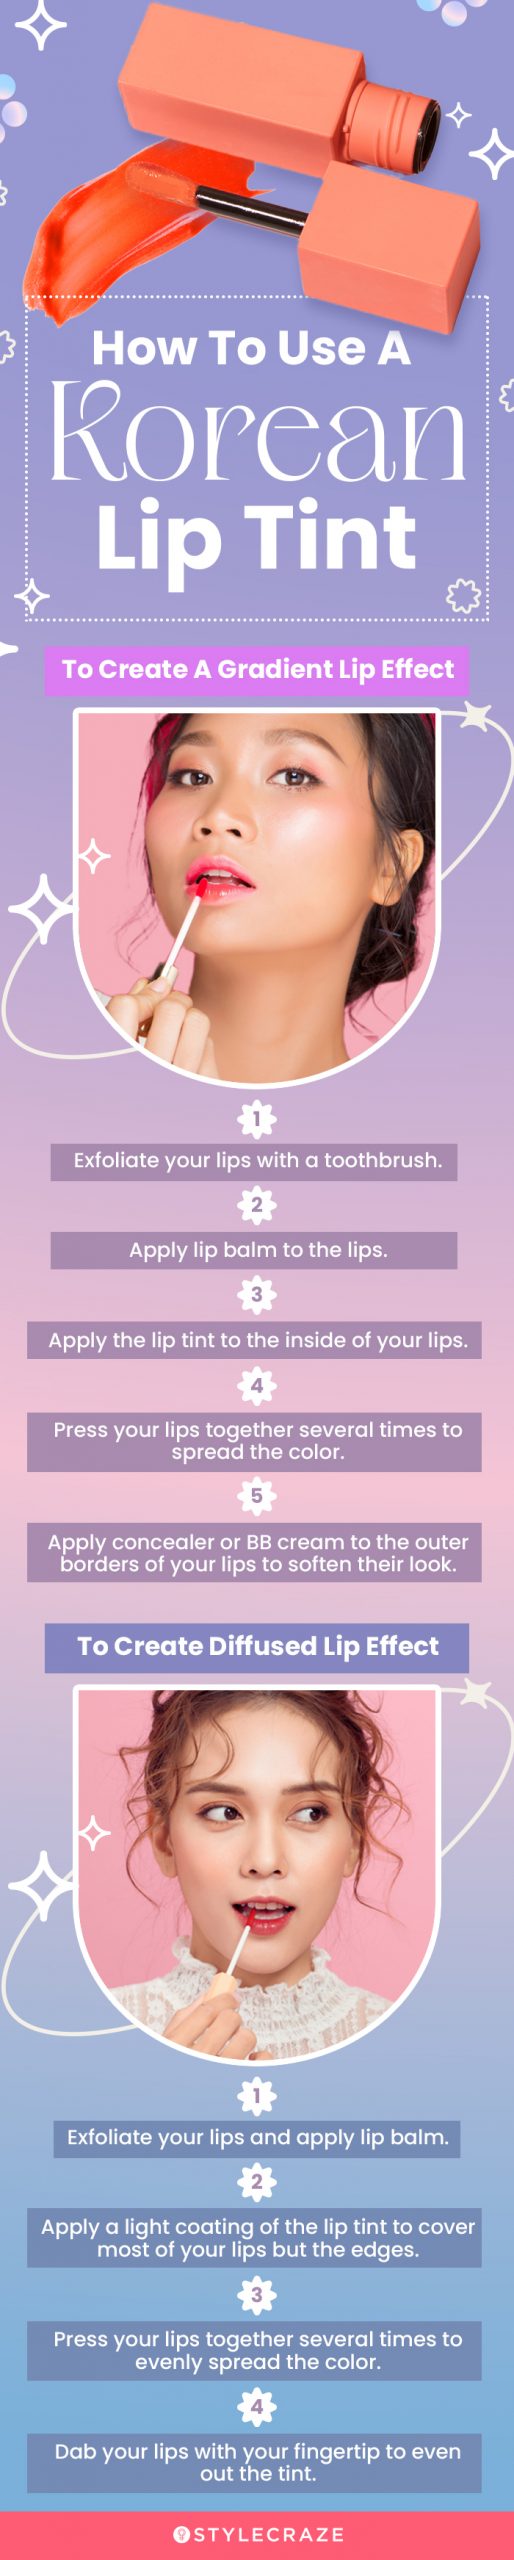 How To Use A Korean Lip Tint (infographic)